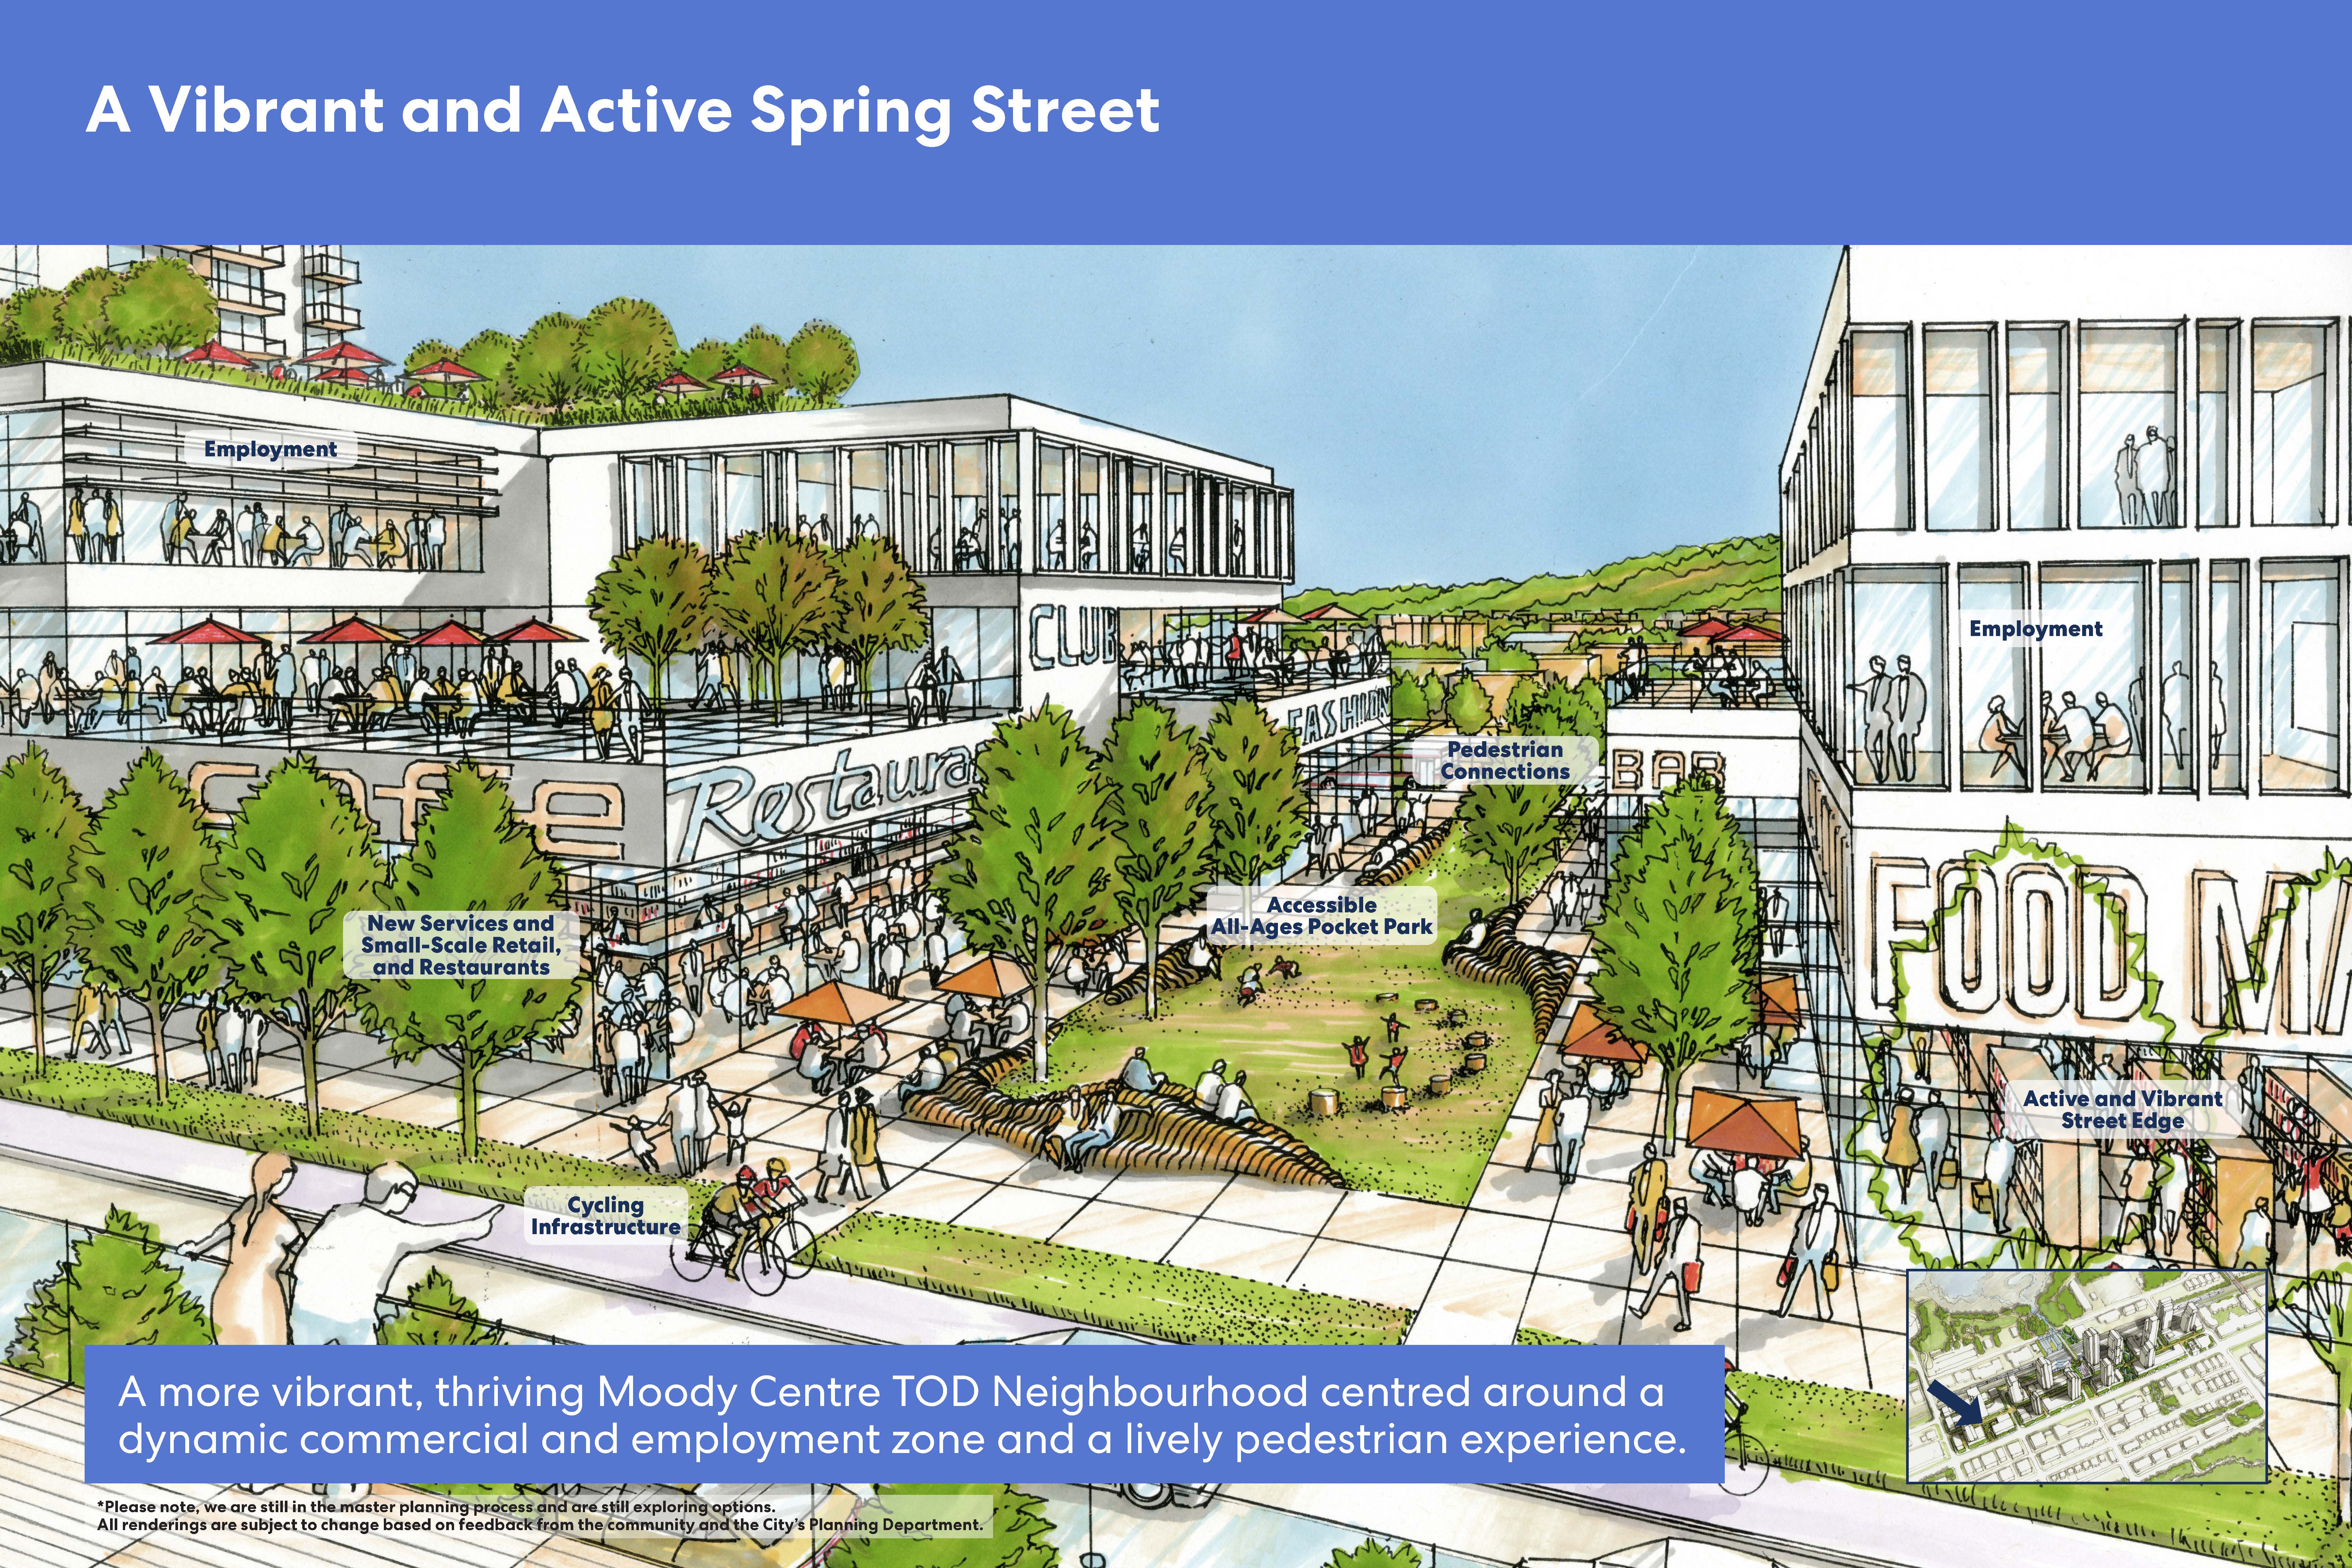 A Vibrant and Active Spring Street